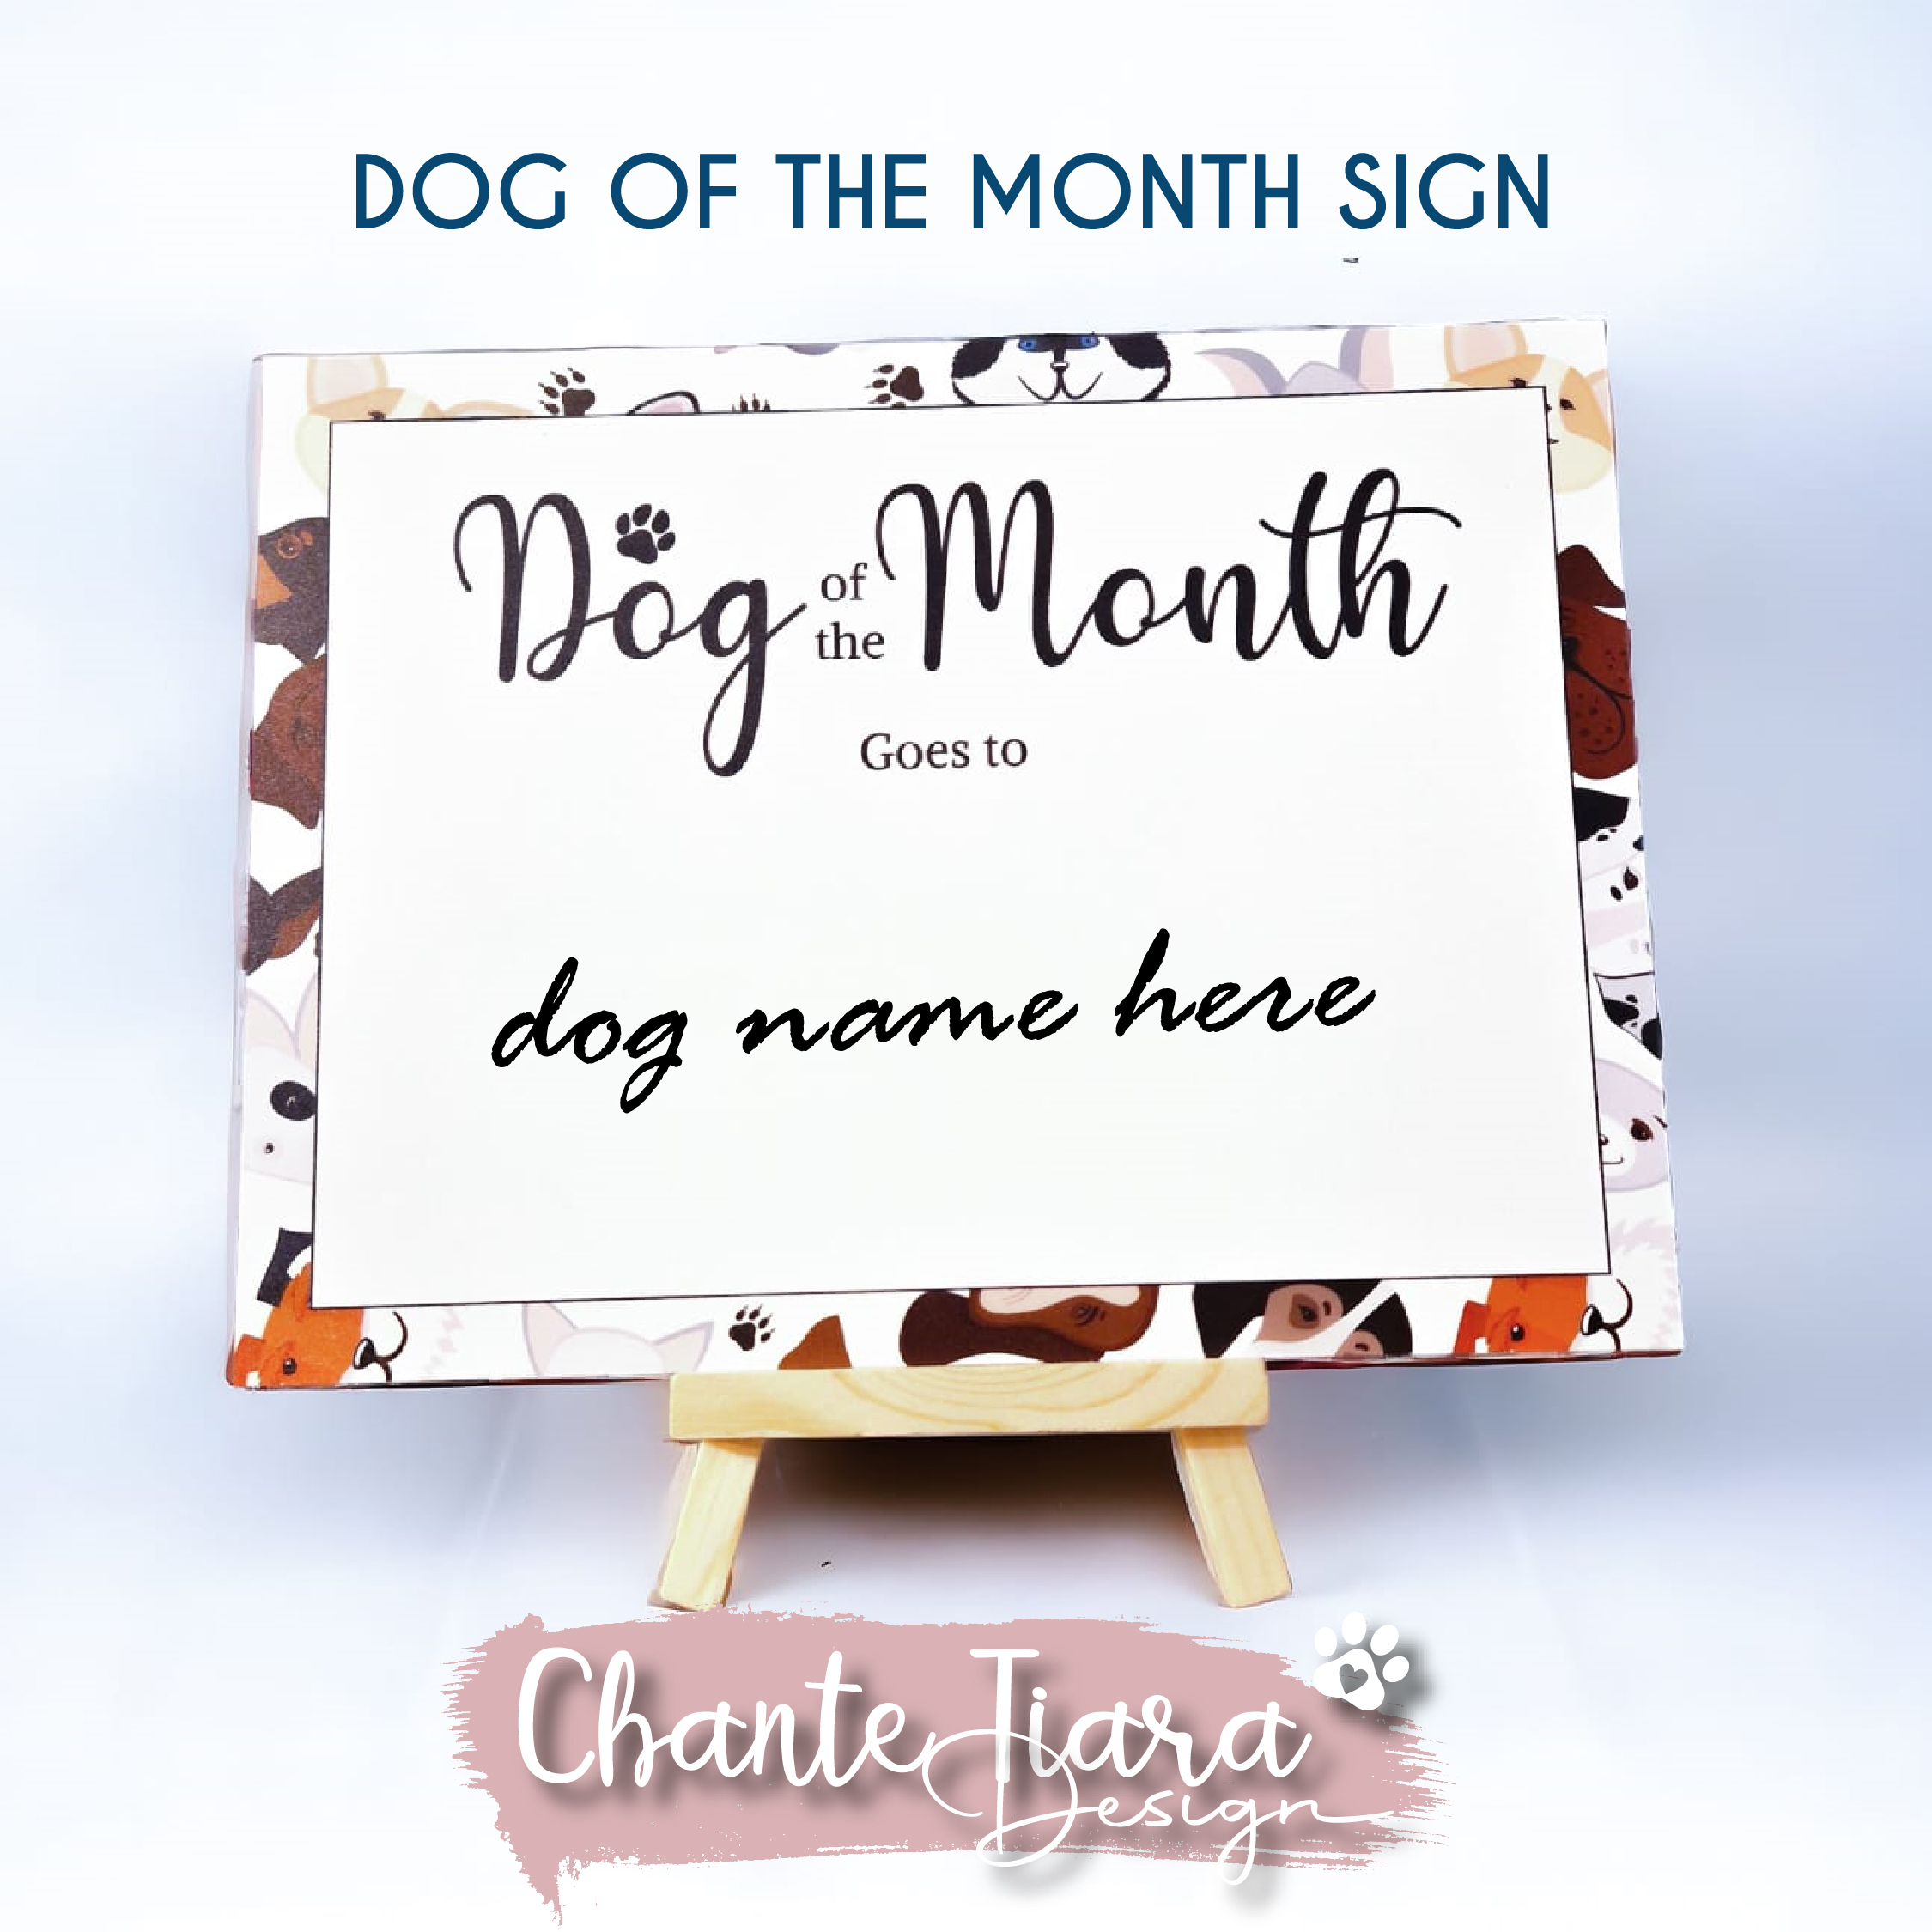 DOG OF THE MONTH SIGN